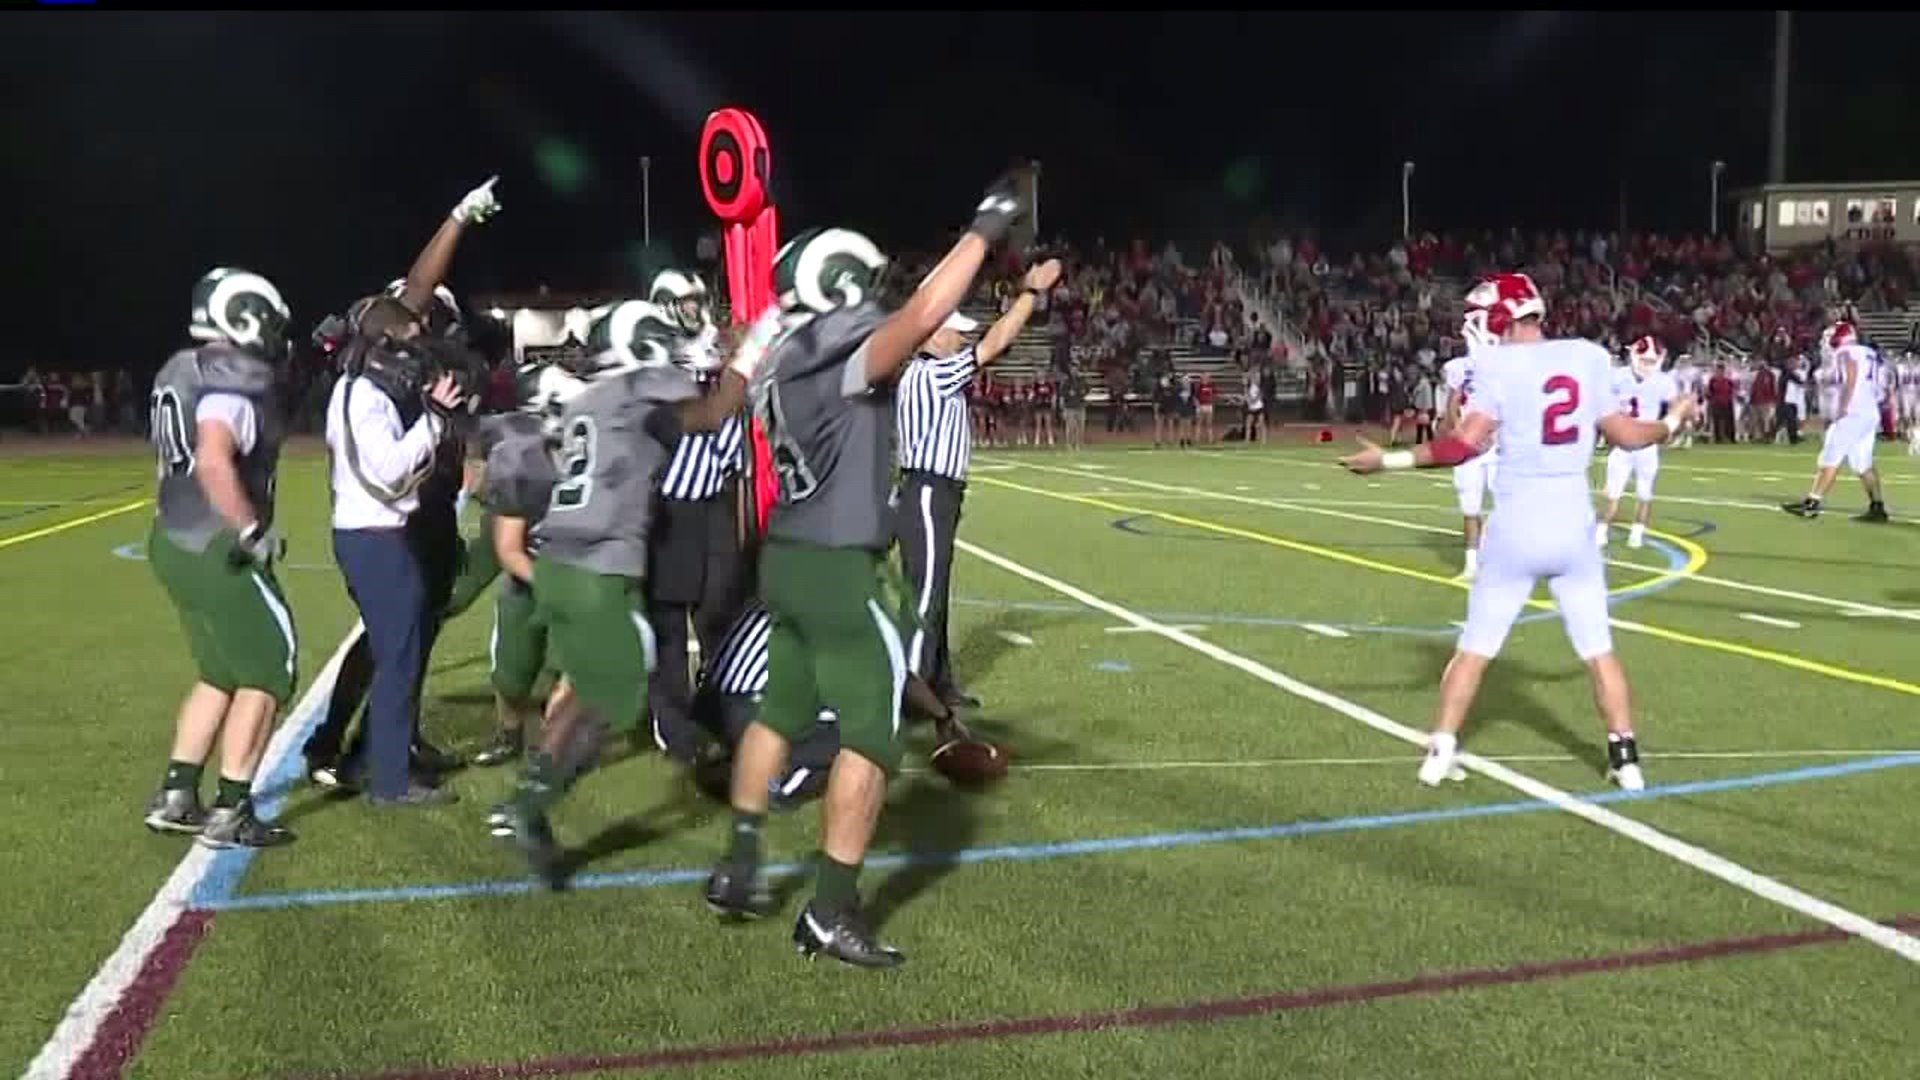 HSFF week 5 Cumberland Valley at Central Dauphin highlights